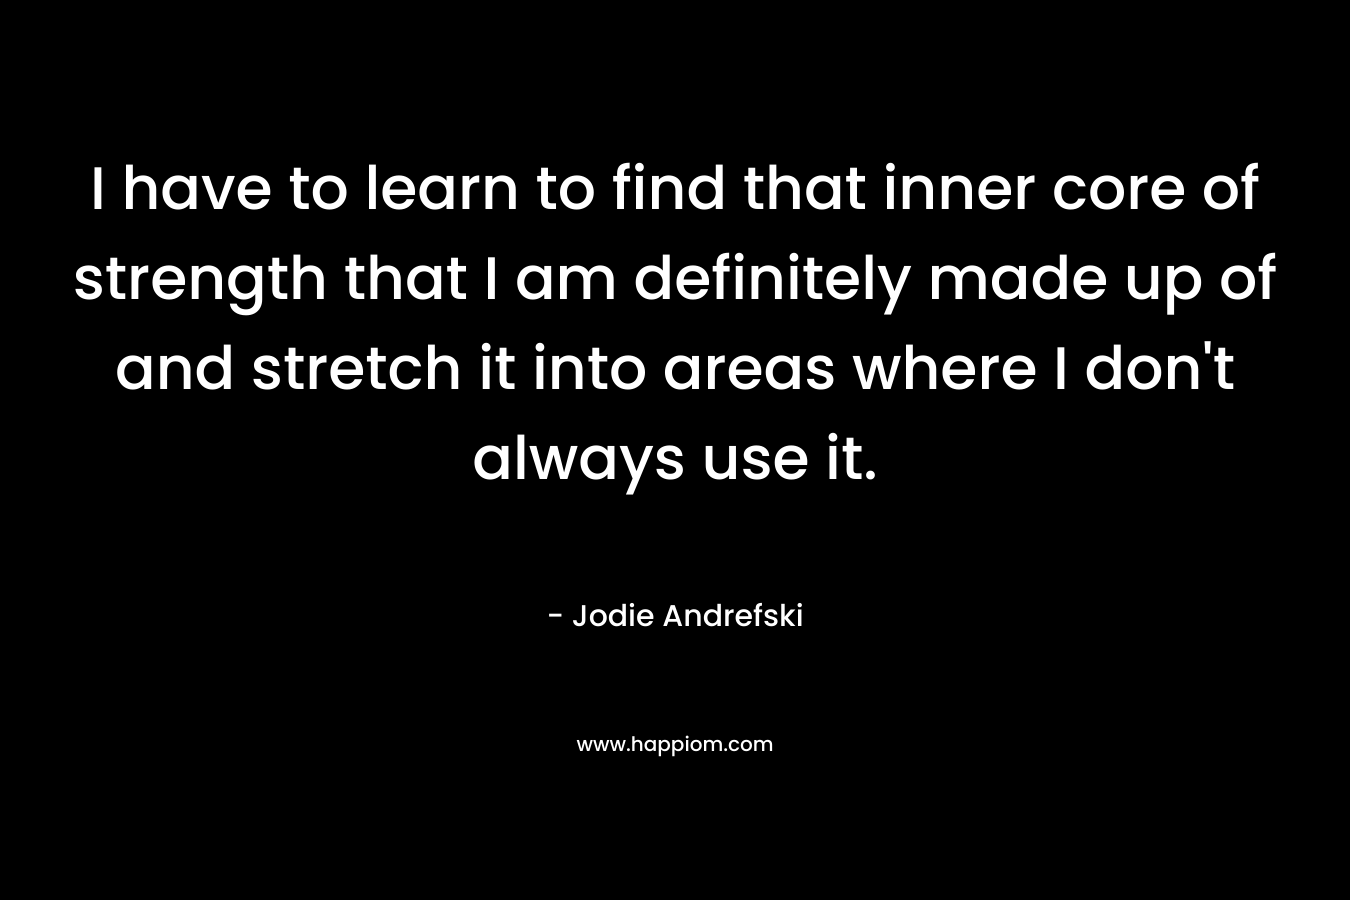 I have to learn to find that inner core of strength that I am definitely made up of and stretch it into areas where I don't always use it.